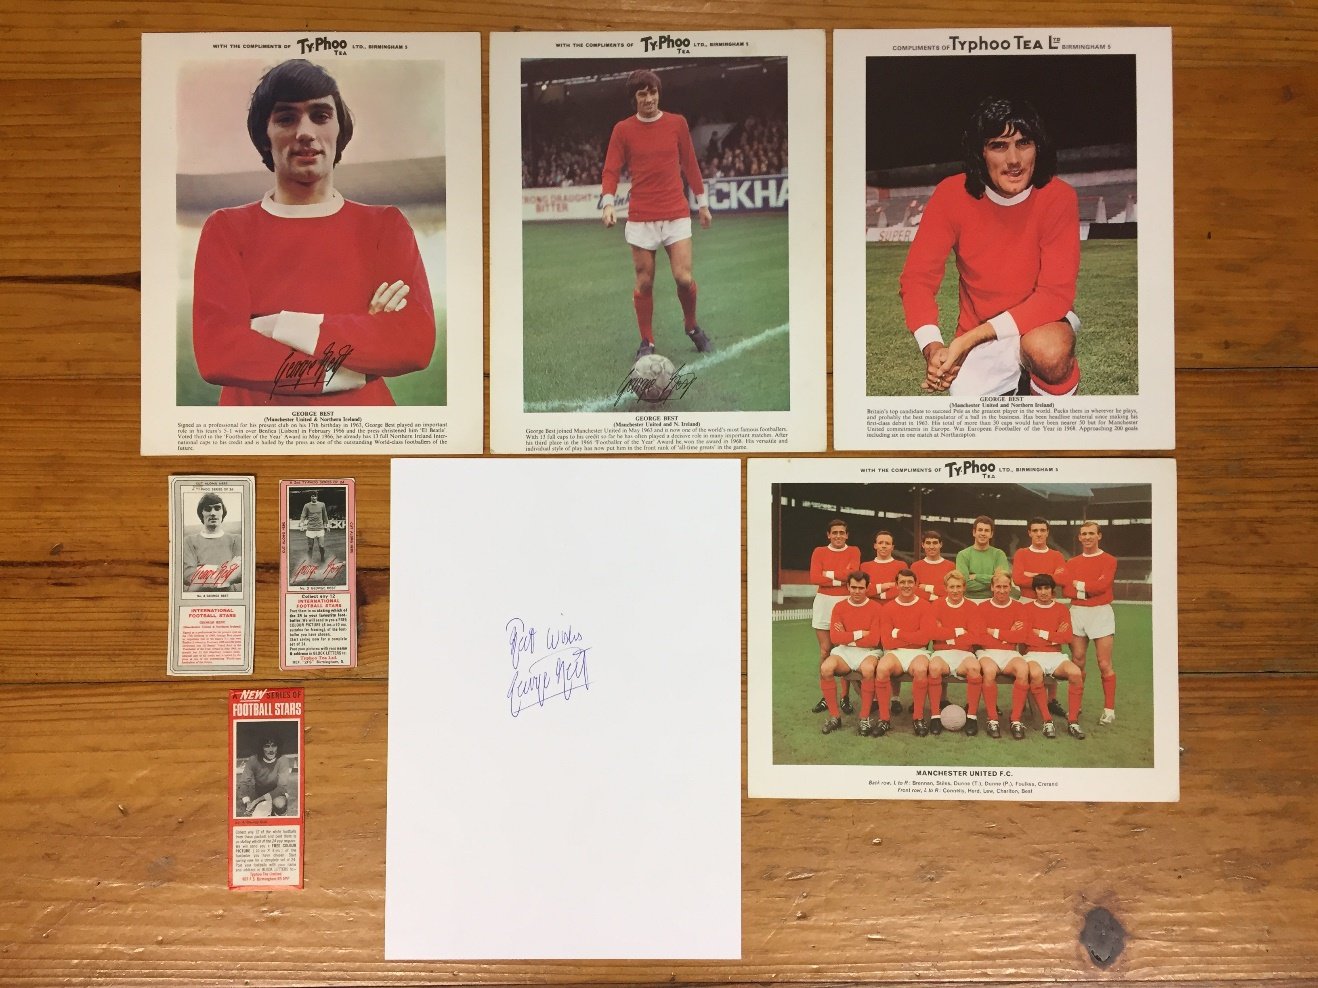 Typhoo Tea George Best Football Cards: 3 different large colour cards of George Best and the